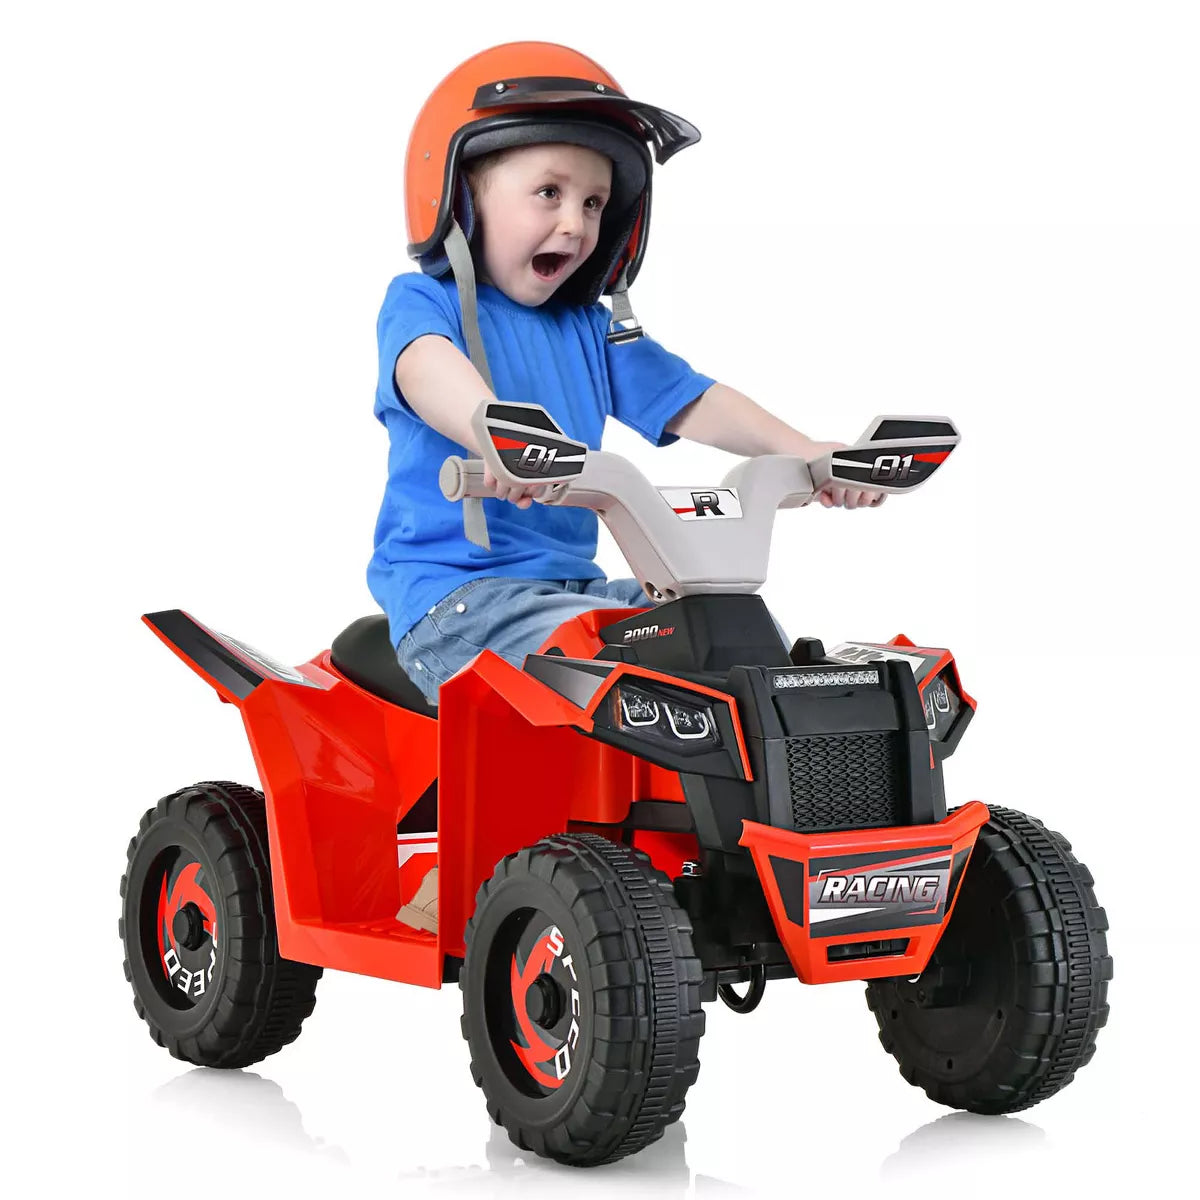 Costway Kids Ride on ATV 4 Wheeler Quad Toy Car 6V Battery Powered Motorized Toy Red